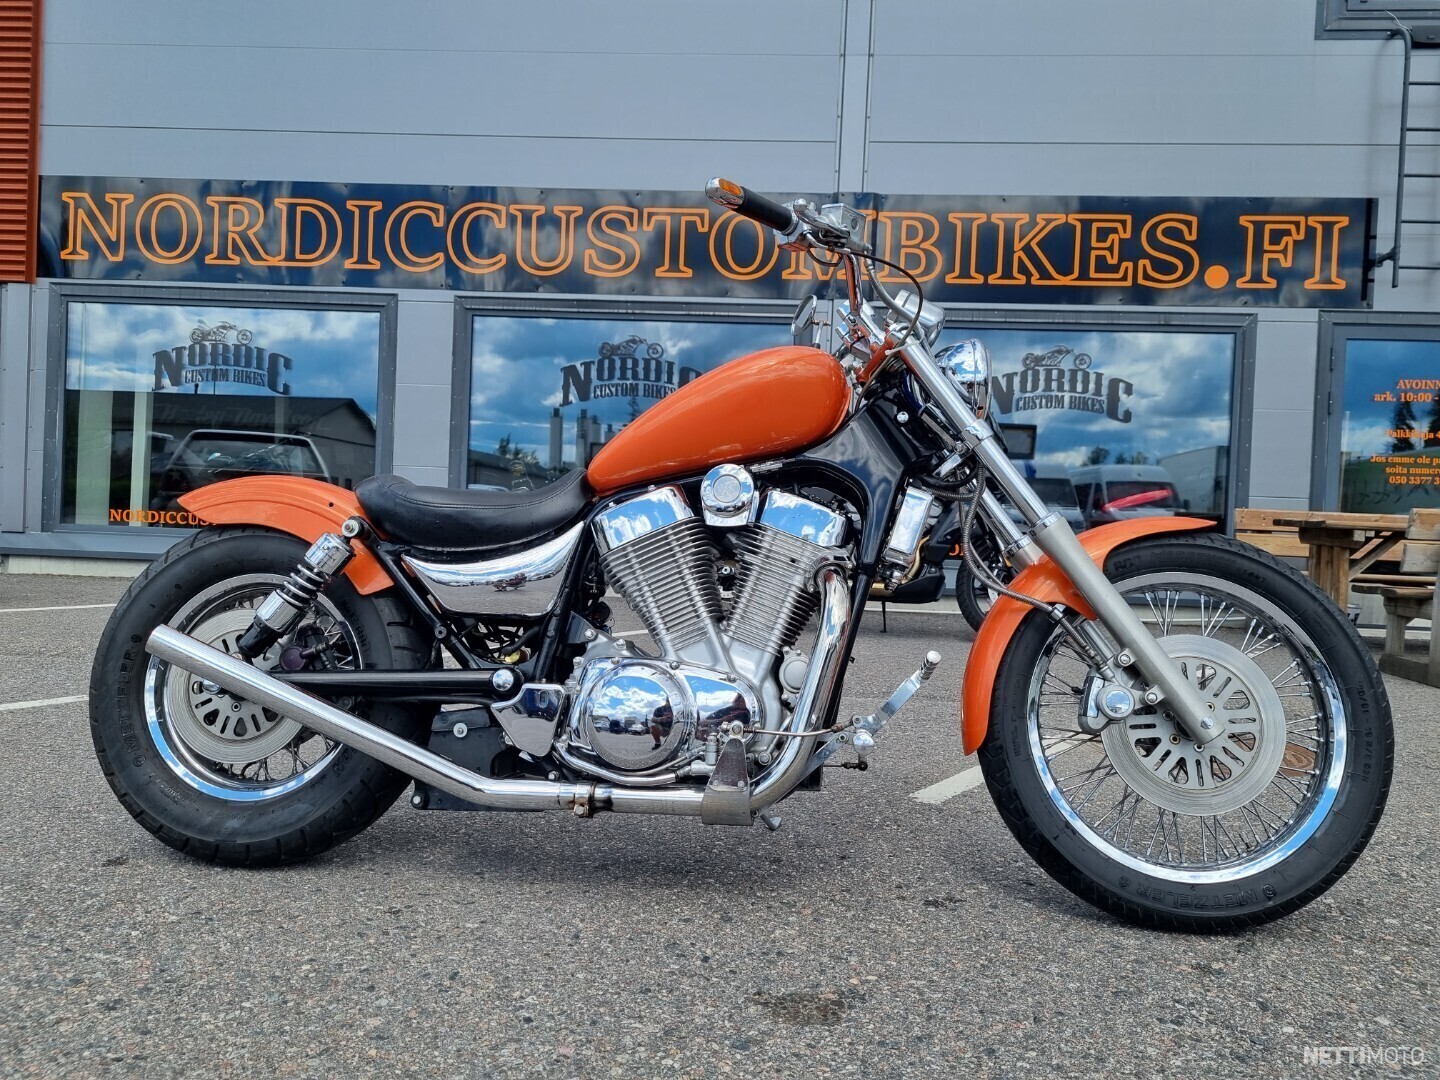 Choppertown - Check out our bro JC Muniz new build - Suzuki intruder 1400  1995. He usually builds Harley's , but it's evident his talents go way  beyond that.